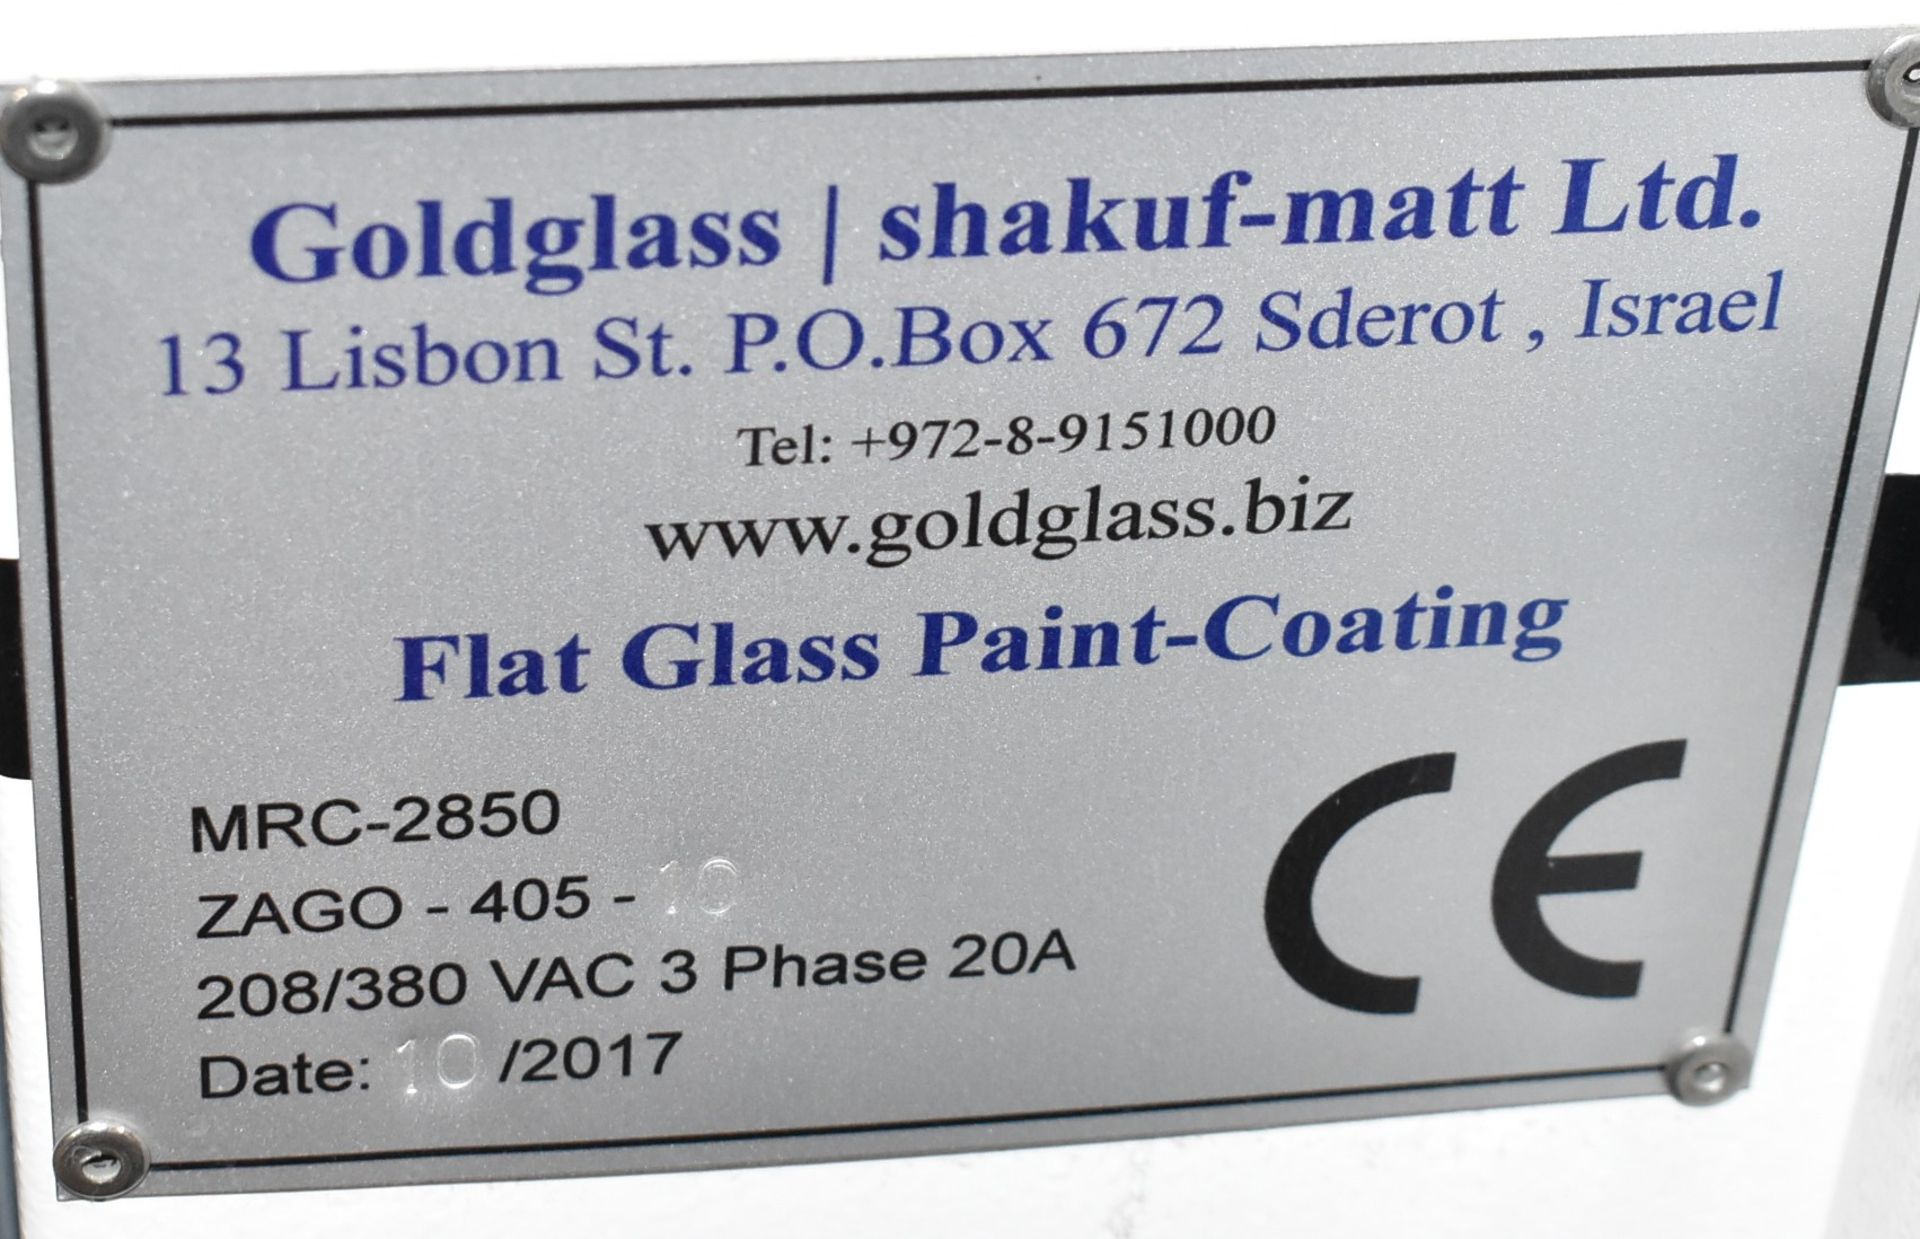 GOLD GLASS TECHNOLOGIES (2017) M.R.C 2850-M CNC FLAT GLASS PAINT LINE WITH 93" X 45" POWER INFEED - Image 18 of 19